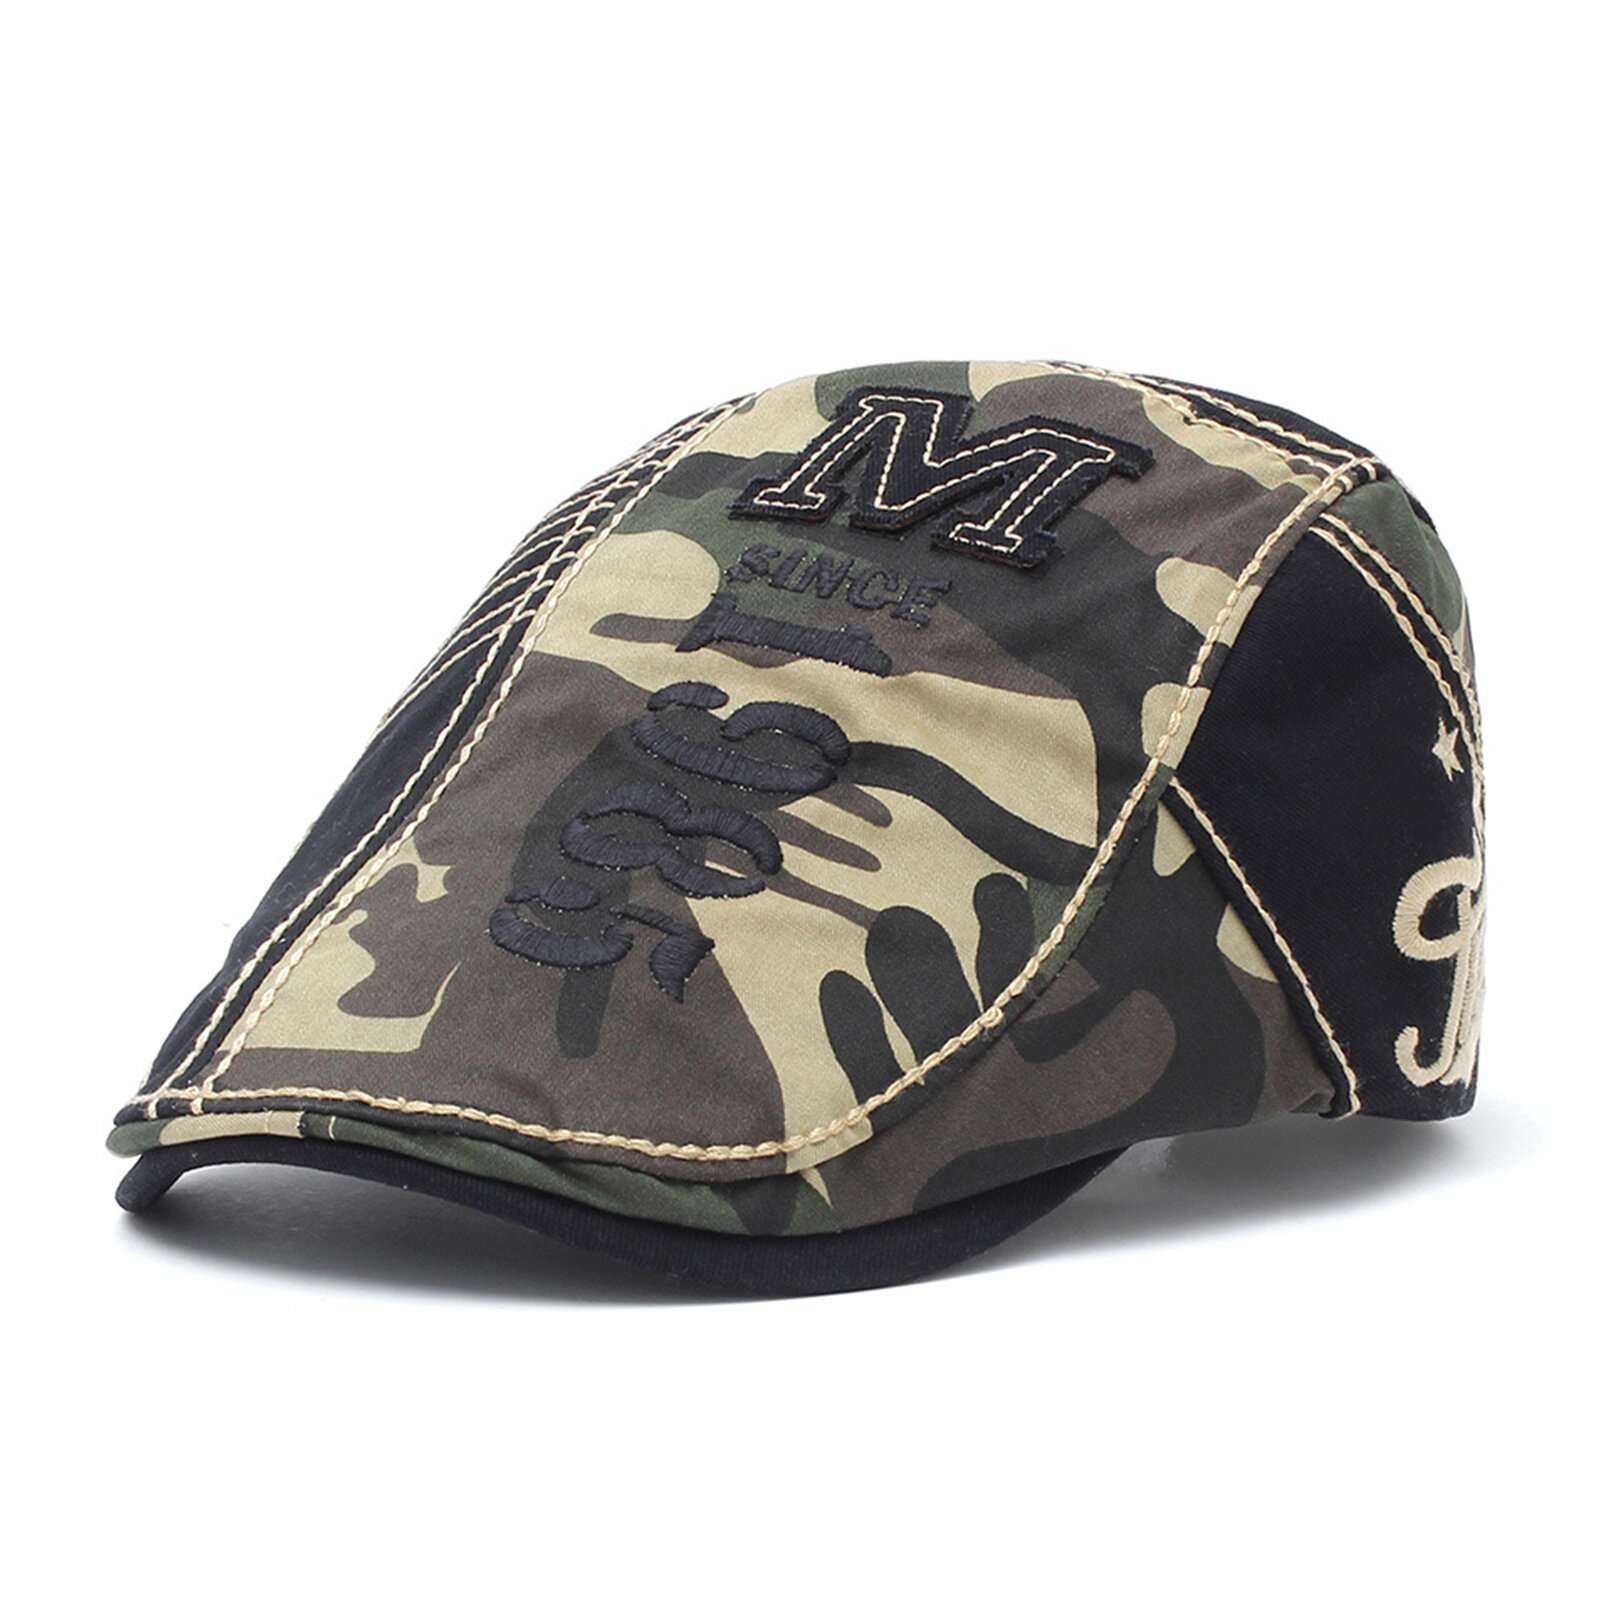 Menico Men Cotton Letter Embroidery Camouflage Breathable Sunshade Short Brim Casual Vintage Forward